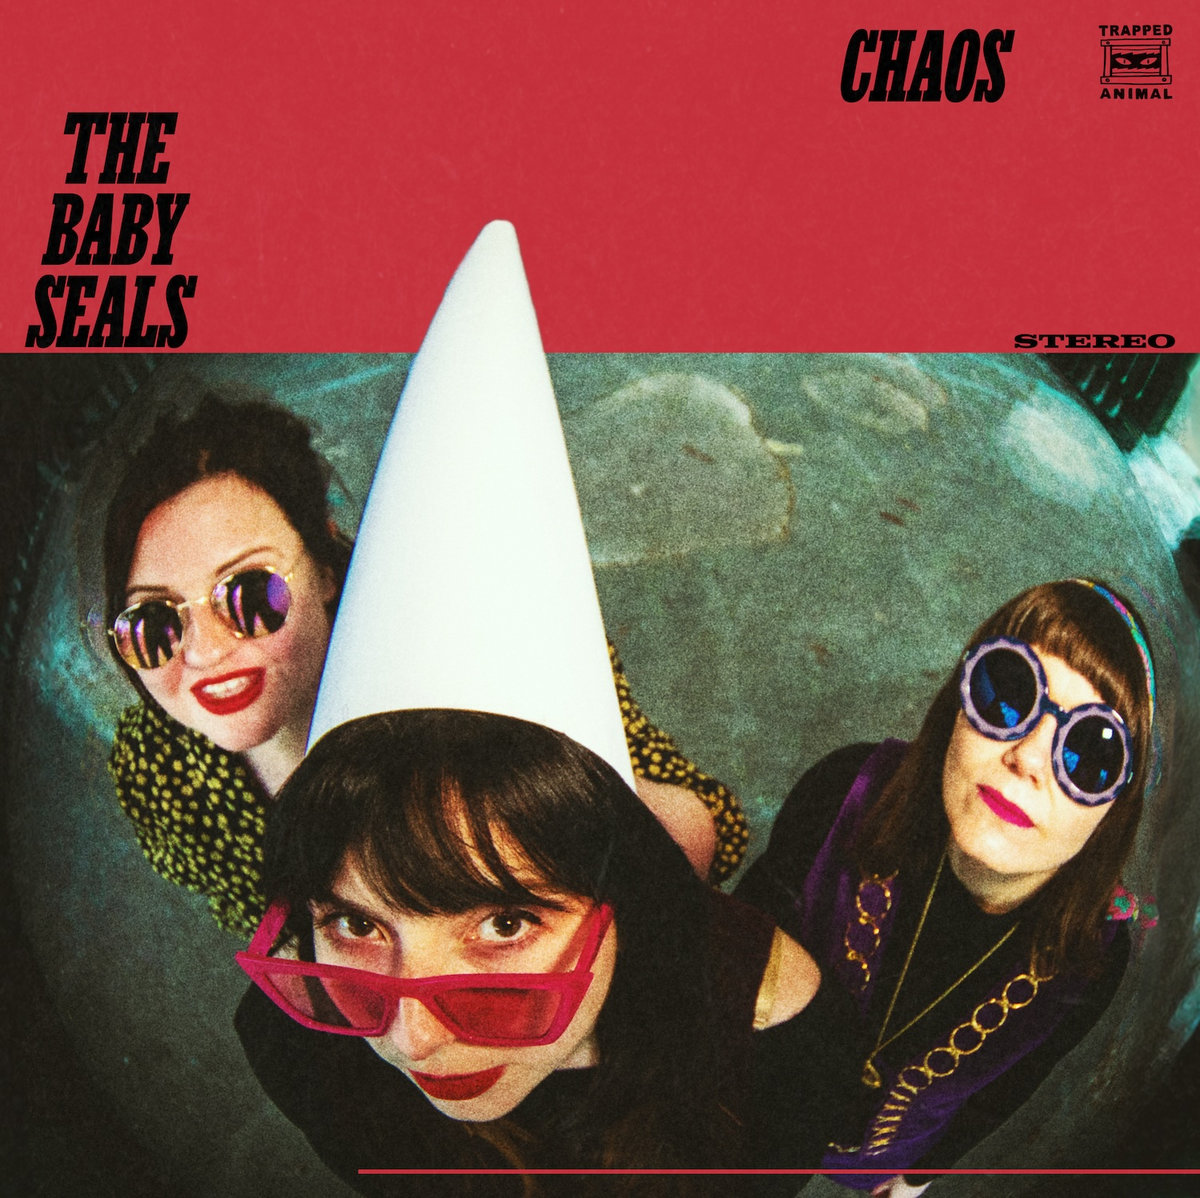 Congratulations to @thebabyseals and @trappedanimal on the release of the fabulous 'Chaos'. Highly recommended. In the words of @ClashMagazine 'The tension and guitar riffs are breath-taking…' lnk.to/tbs_chaos